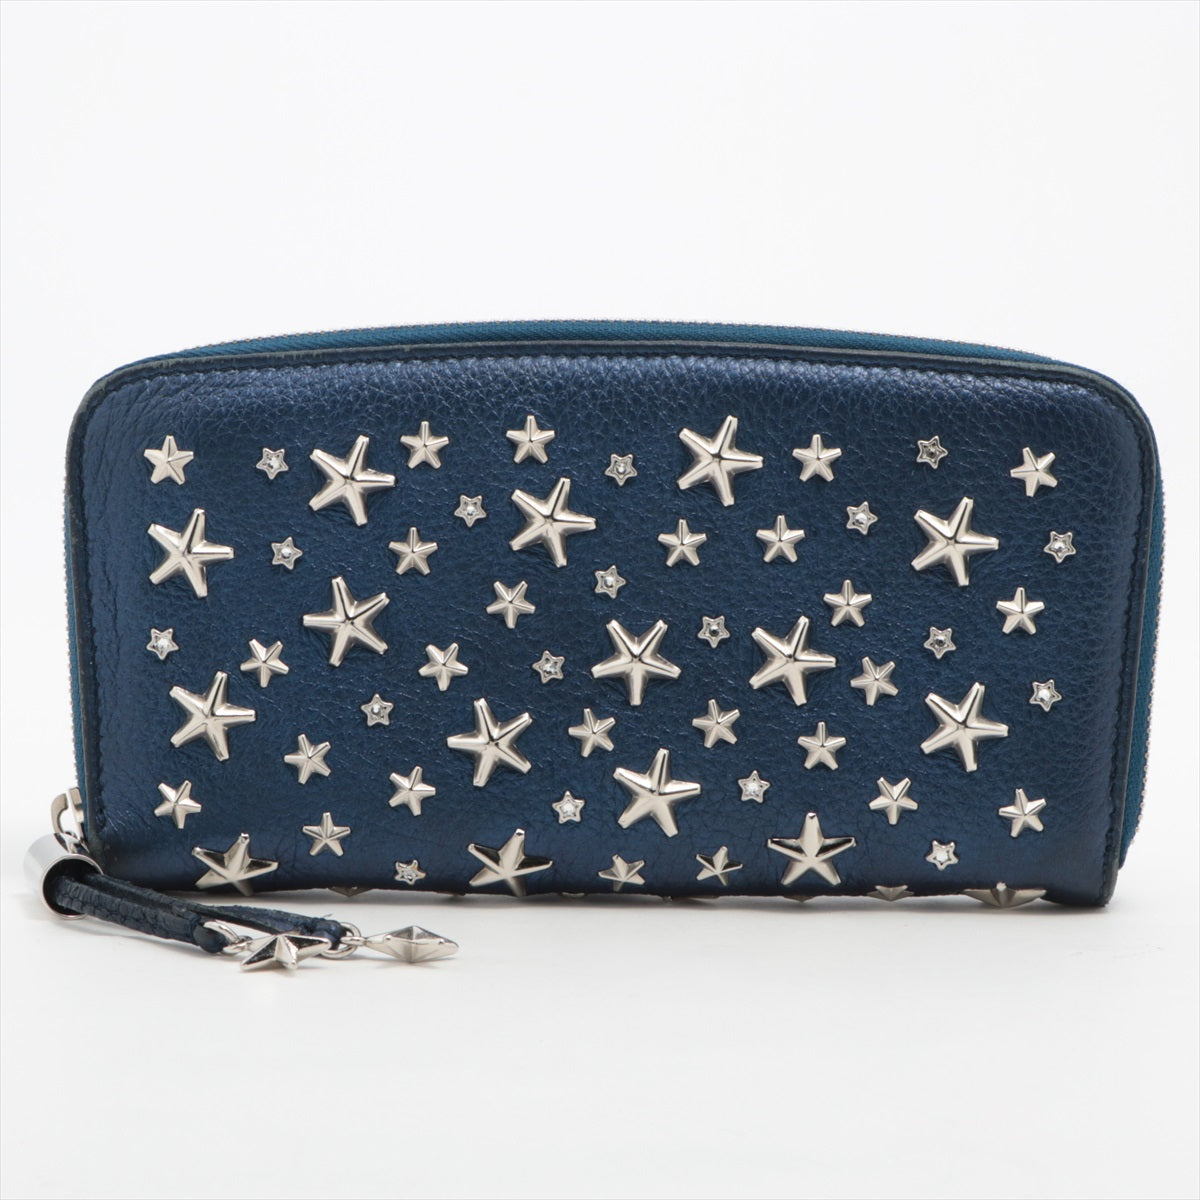 Jimmy Choo Star studs Leather Zip Round Wallet Blue